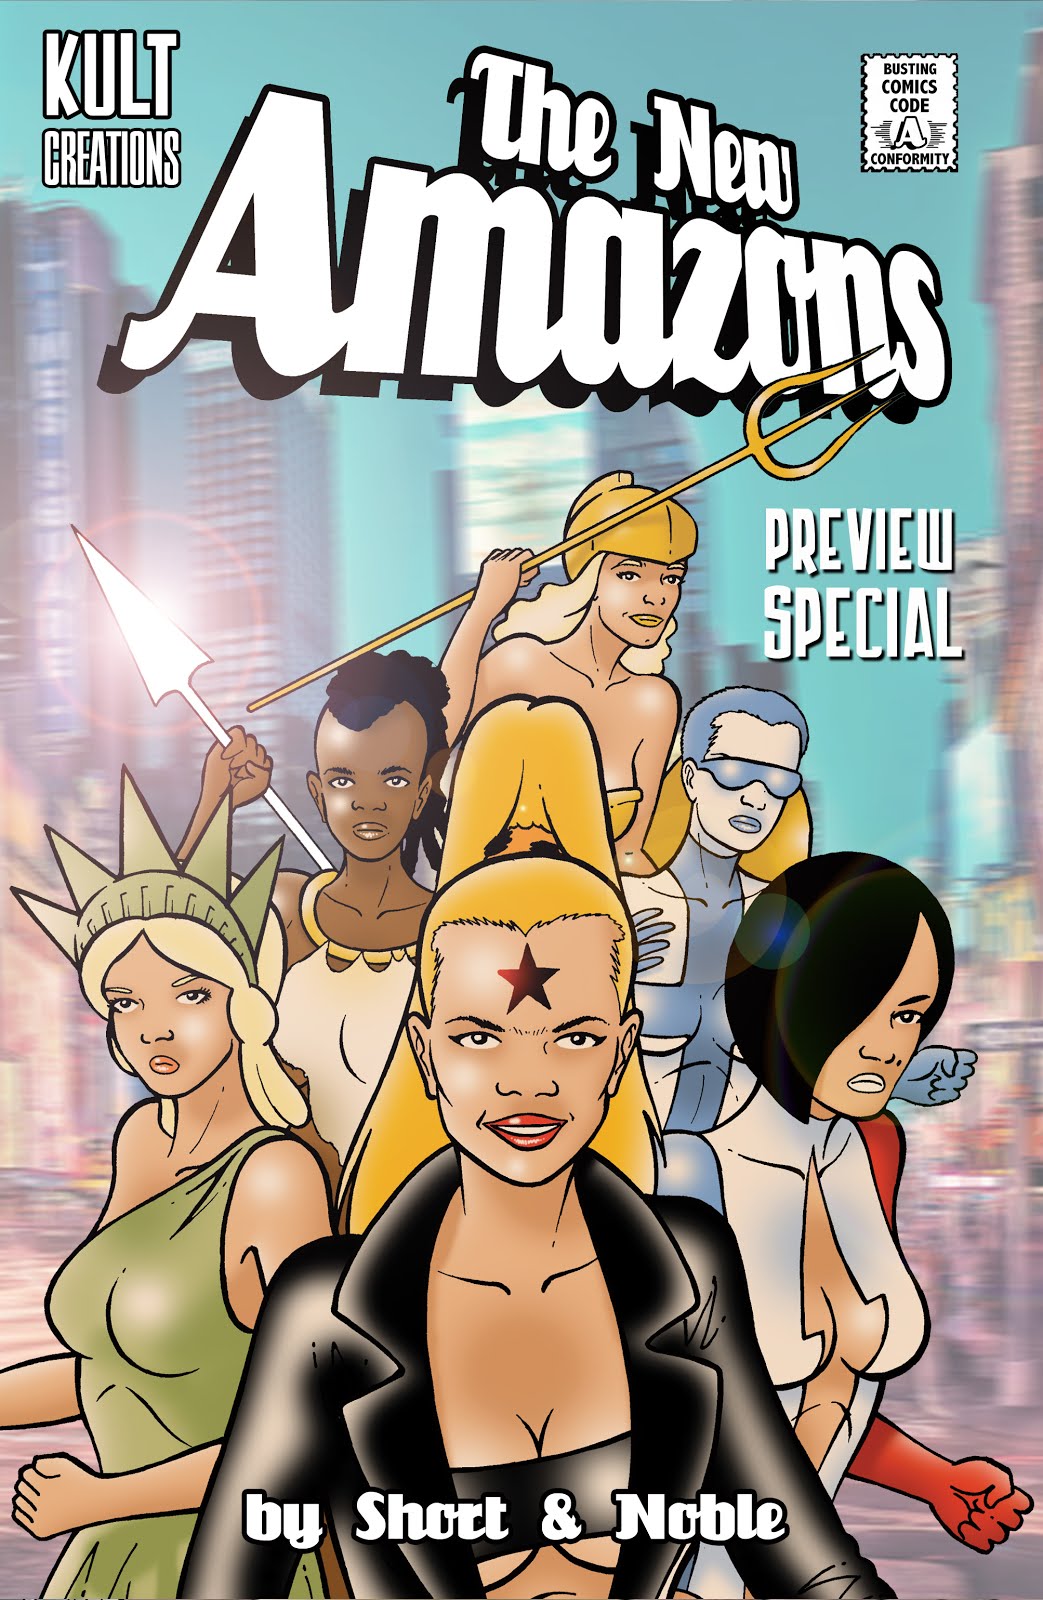 Buy THE NEW AMAZONS PREVIEW SPECIAL below!